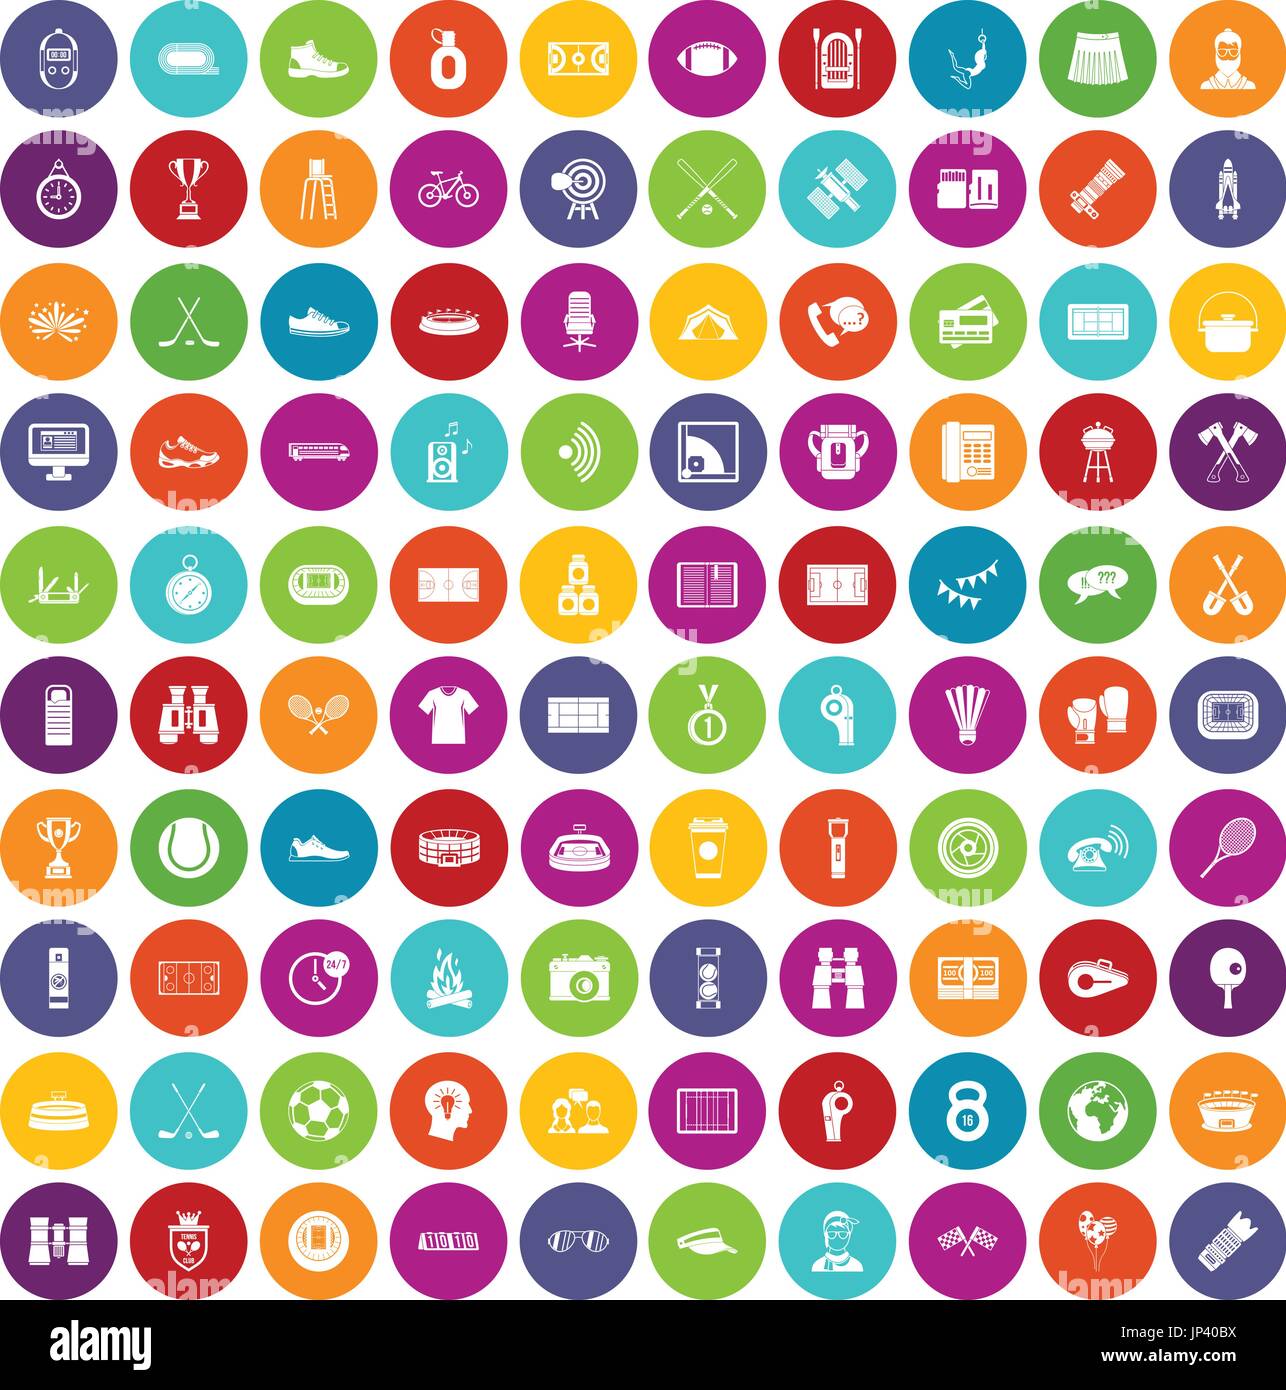 100 sport journalist icons set color Stock Vector